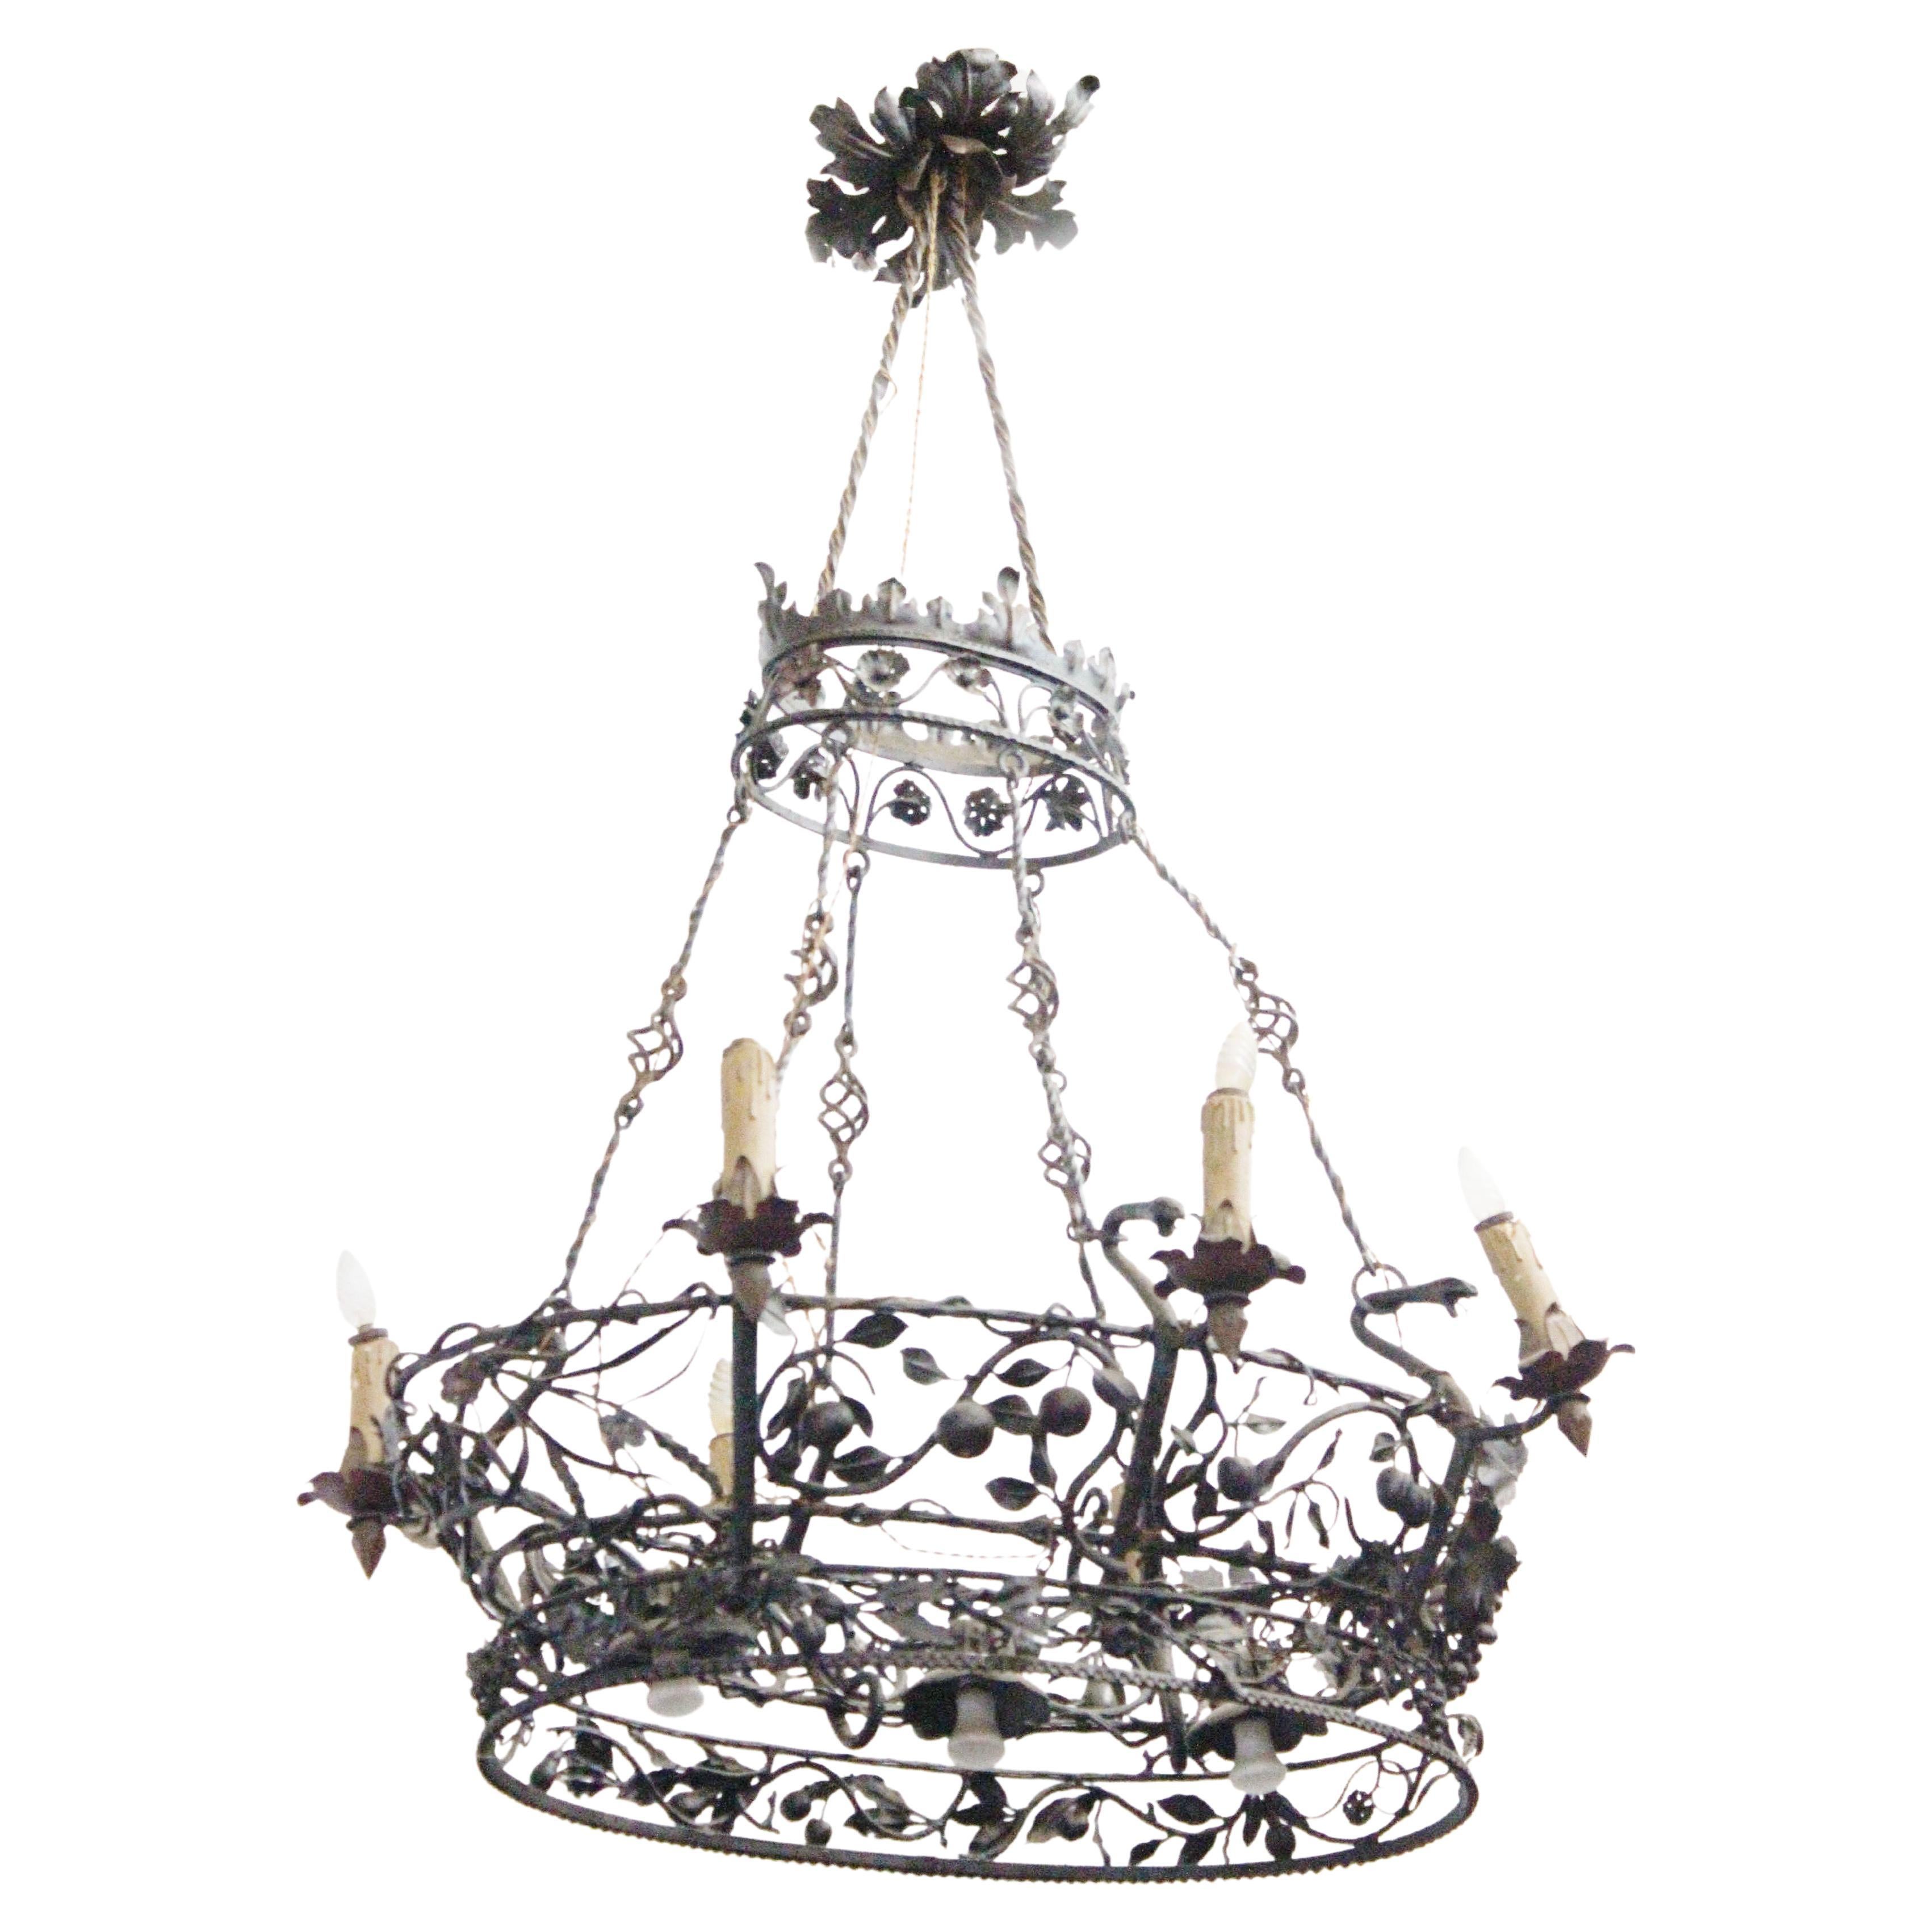 Wrought Iron Chandelier, 1930s